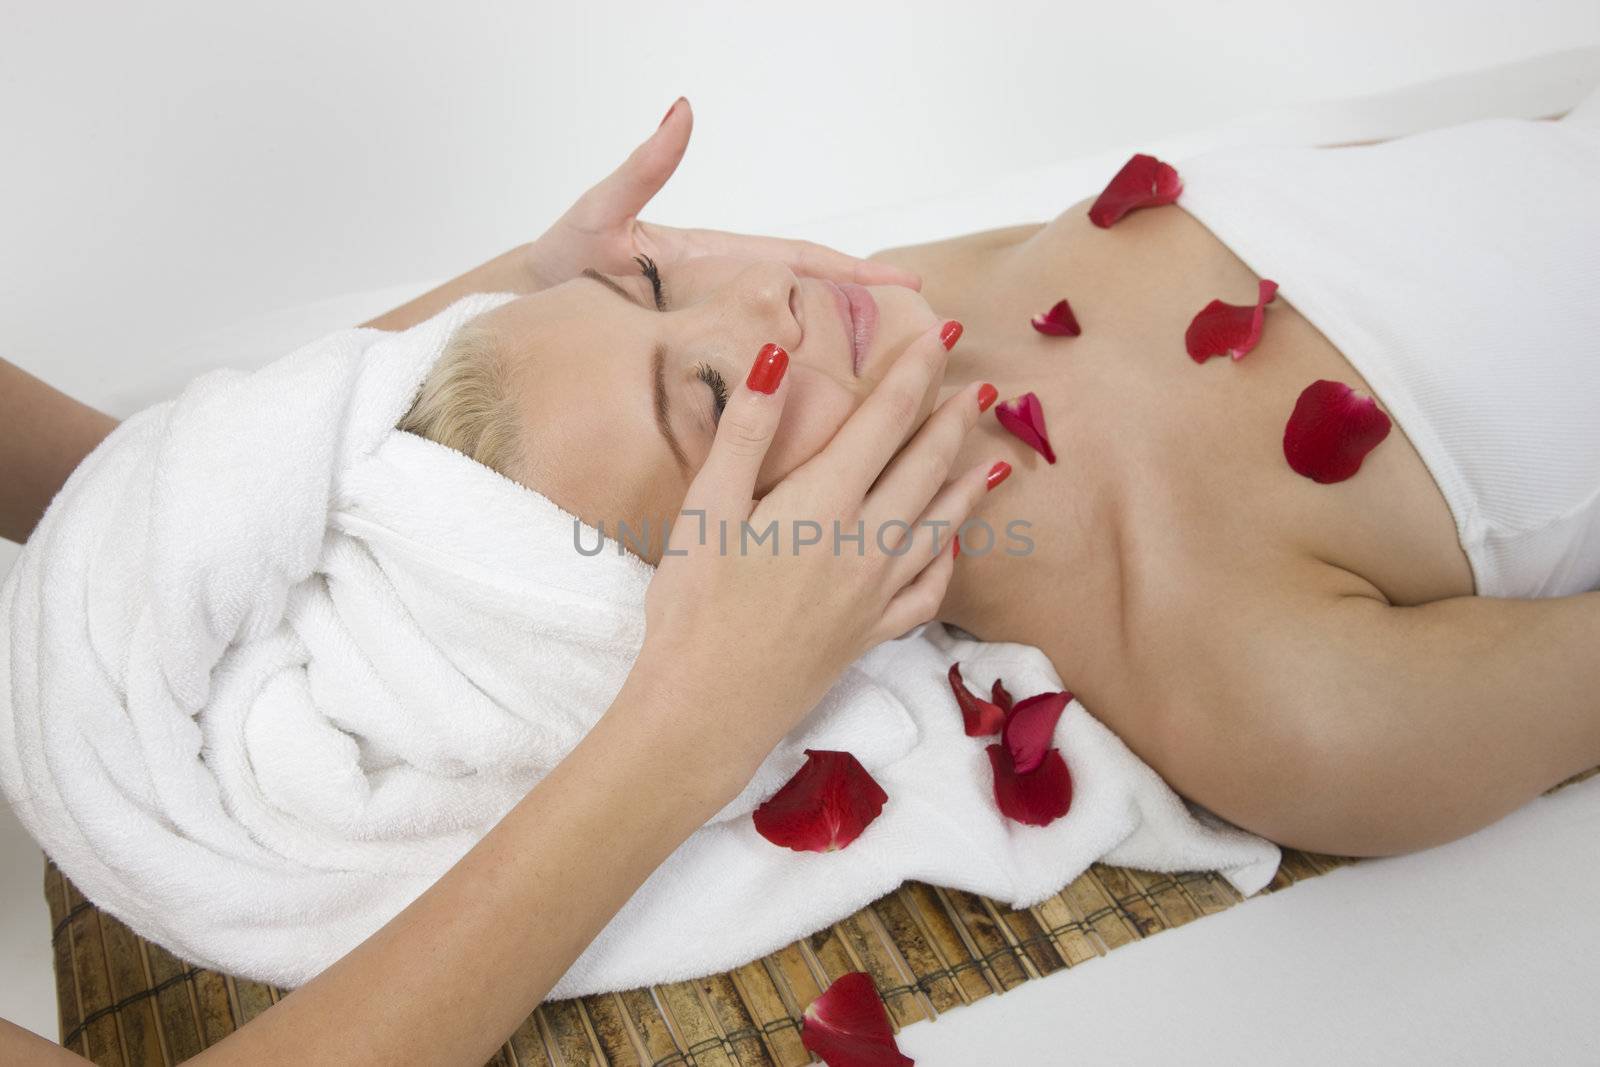 woman receiving face massage from female hands on isolated background